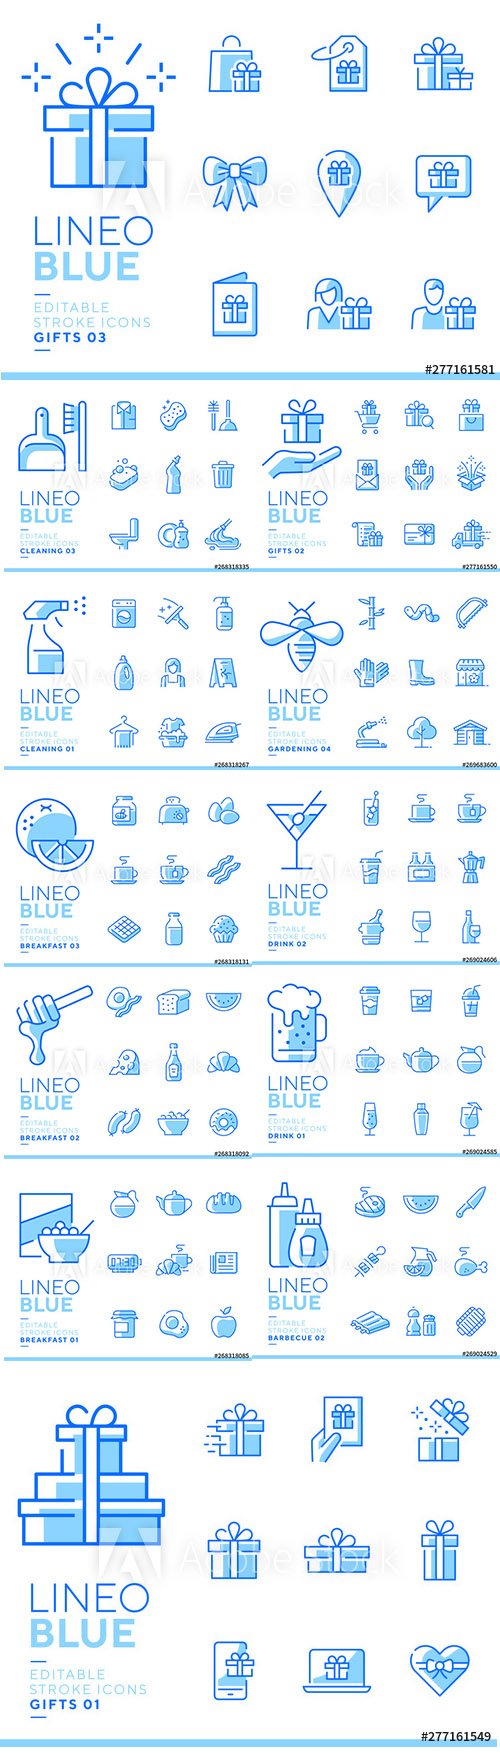 Lineo Blue - Line Icons Vector Pack Vol 4